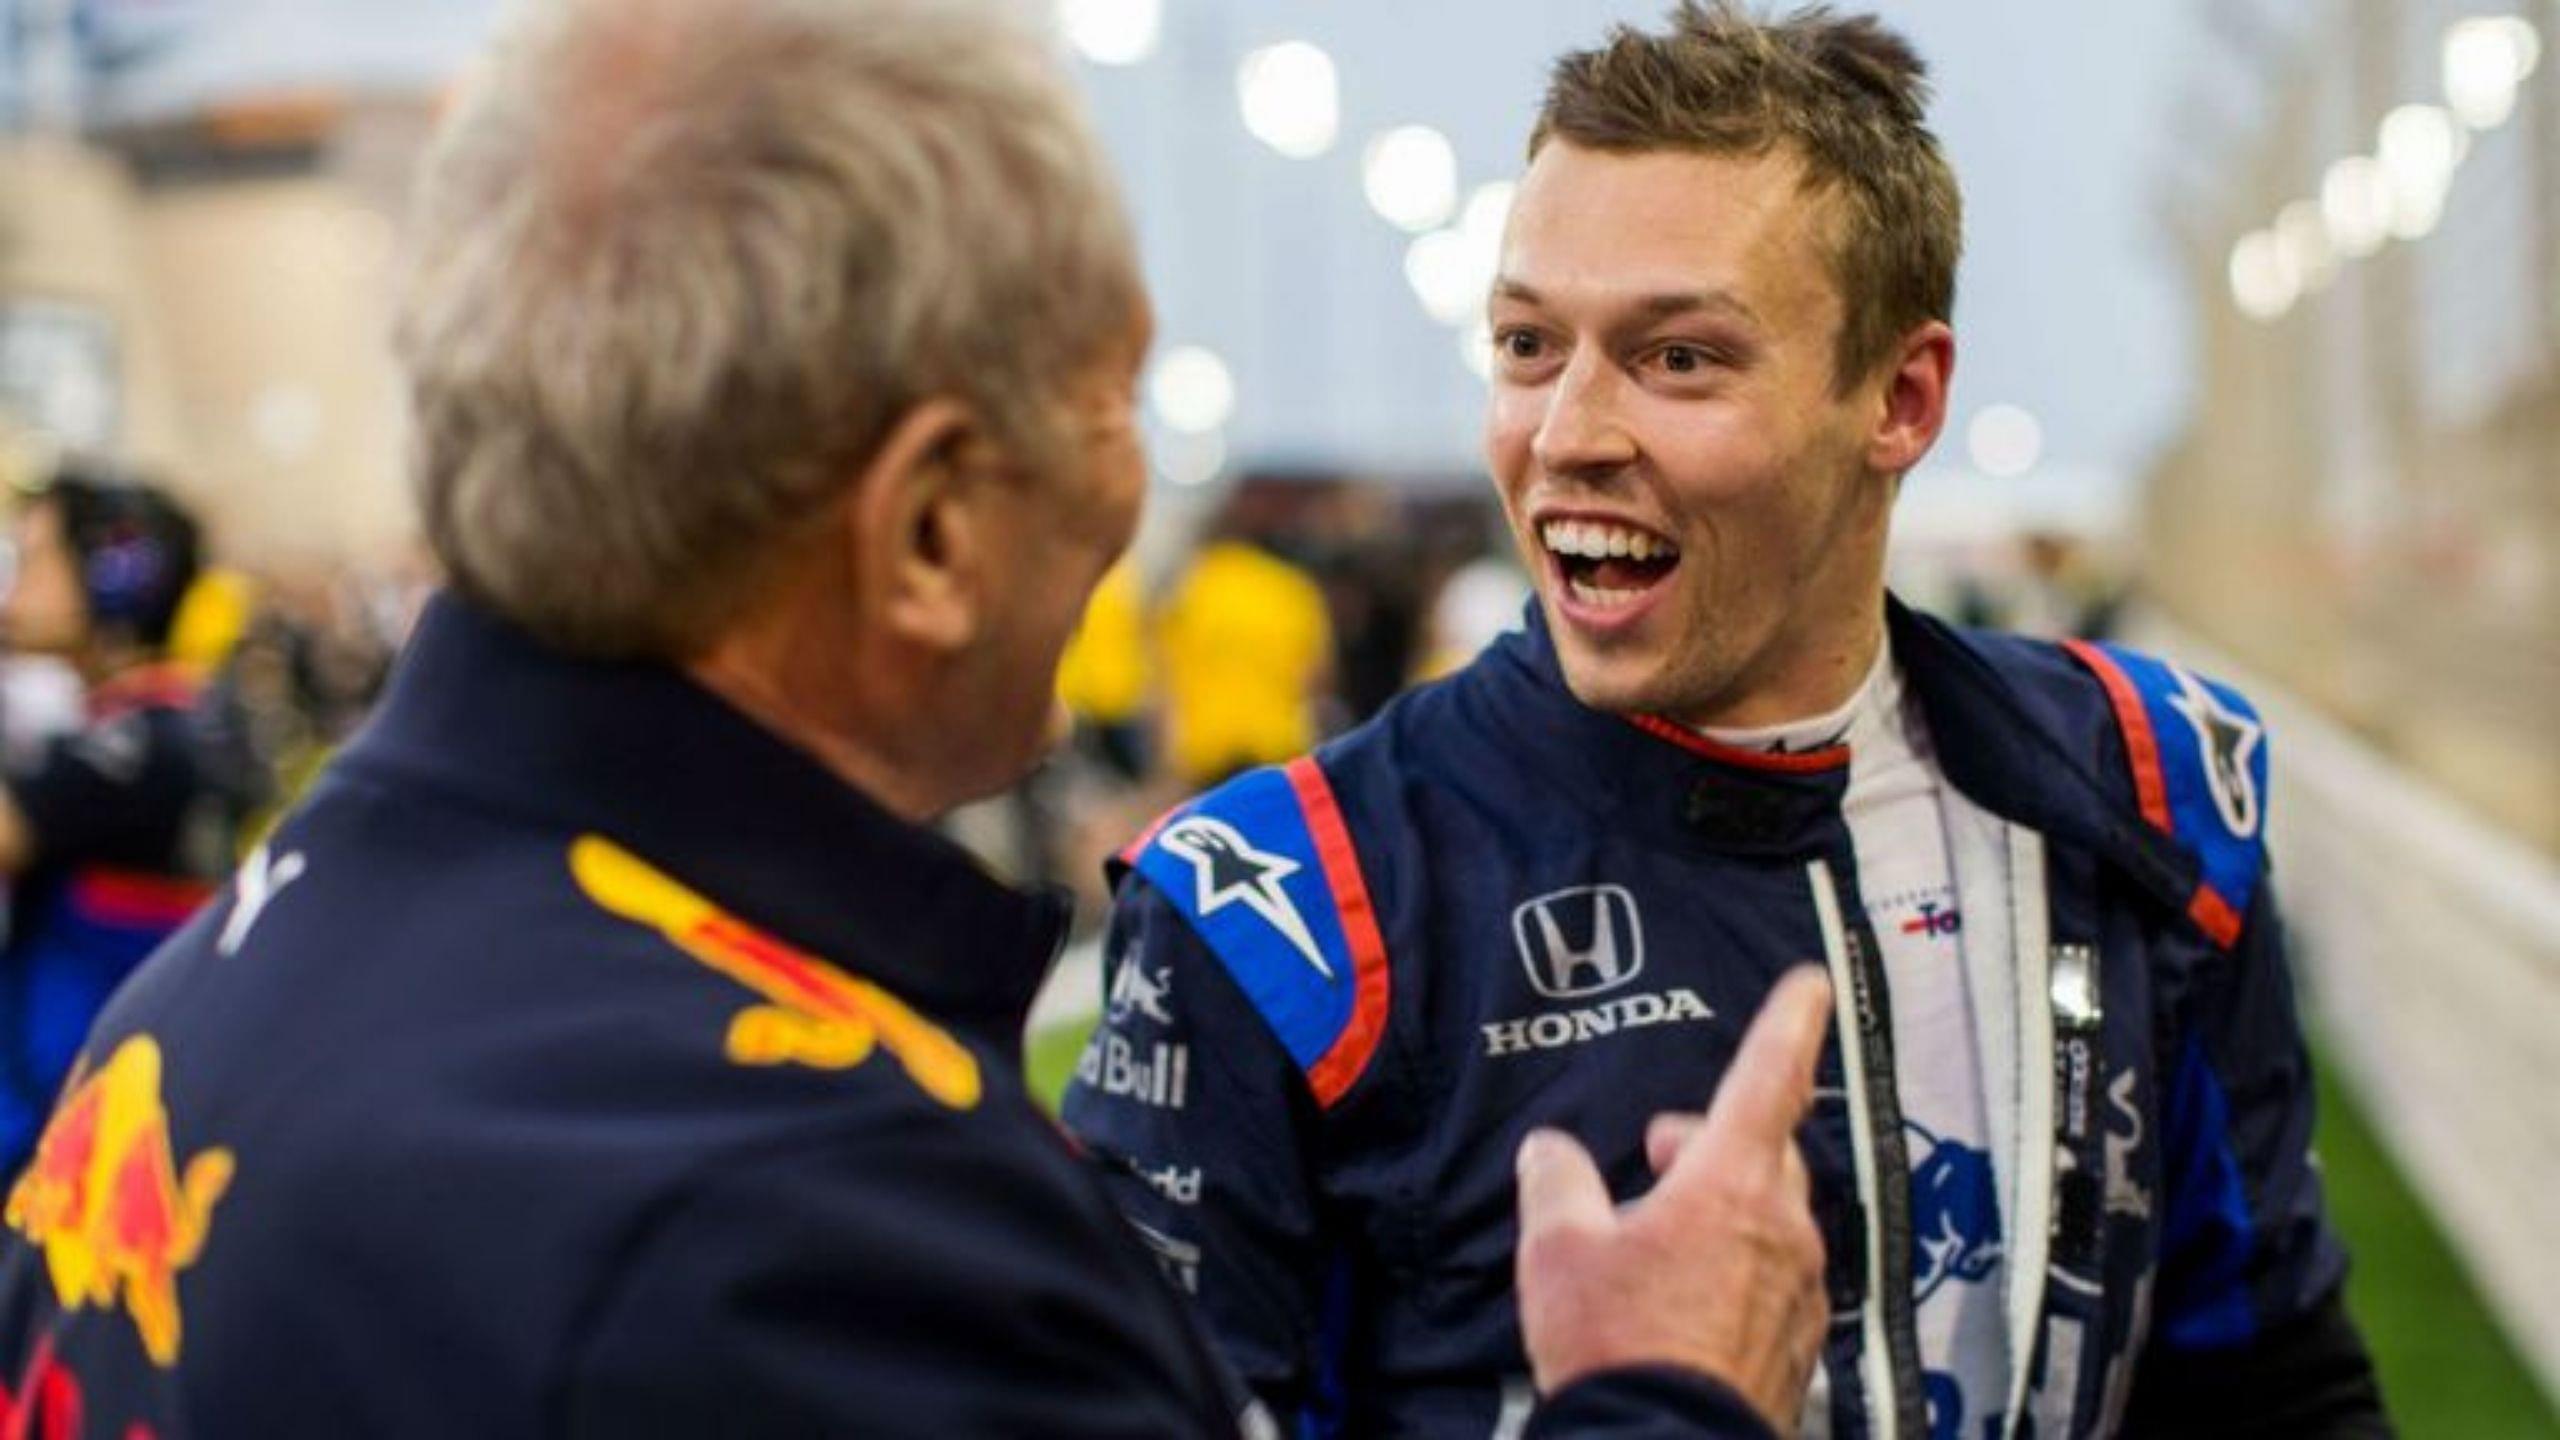 "I always wanted to have a proper fight for the world championship" - Daniil Kvyat makes his aspirations clear for this decade in F1